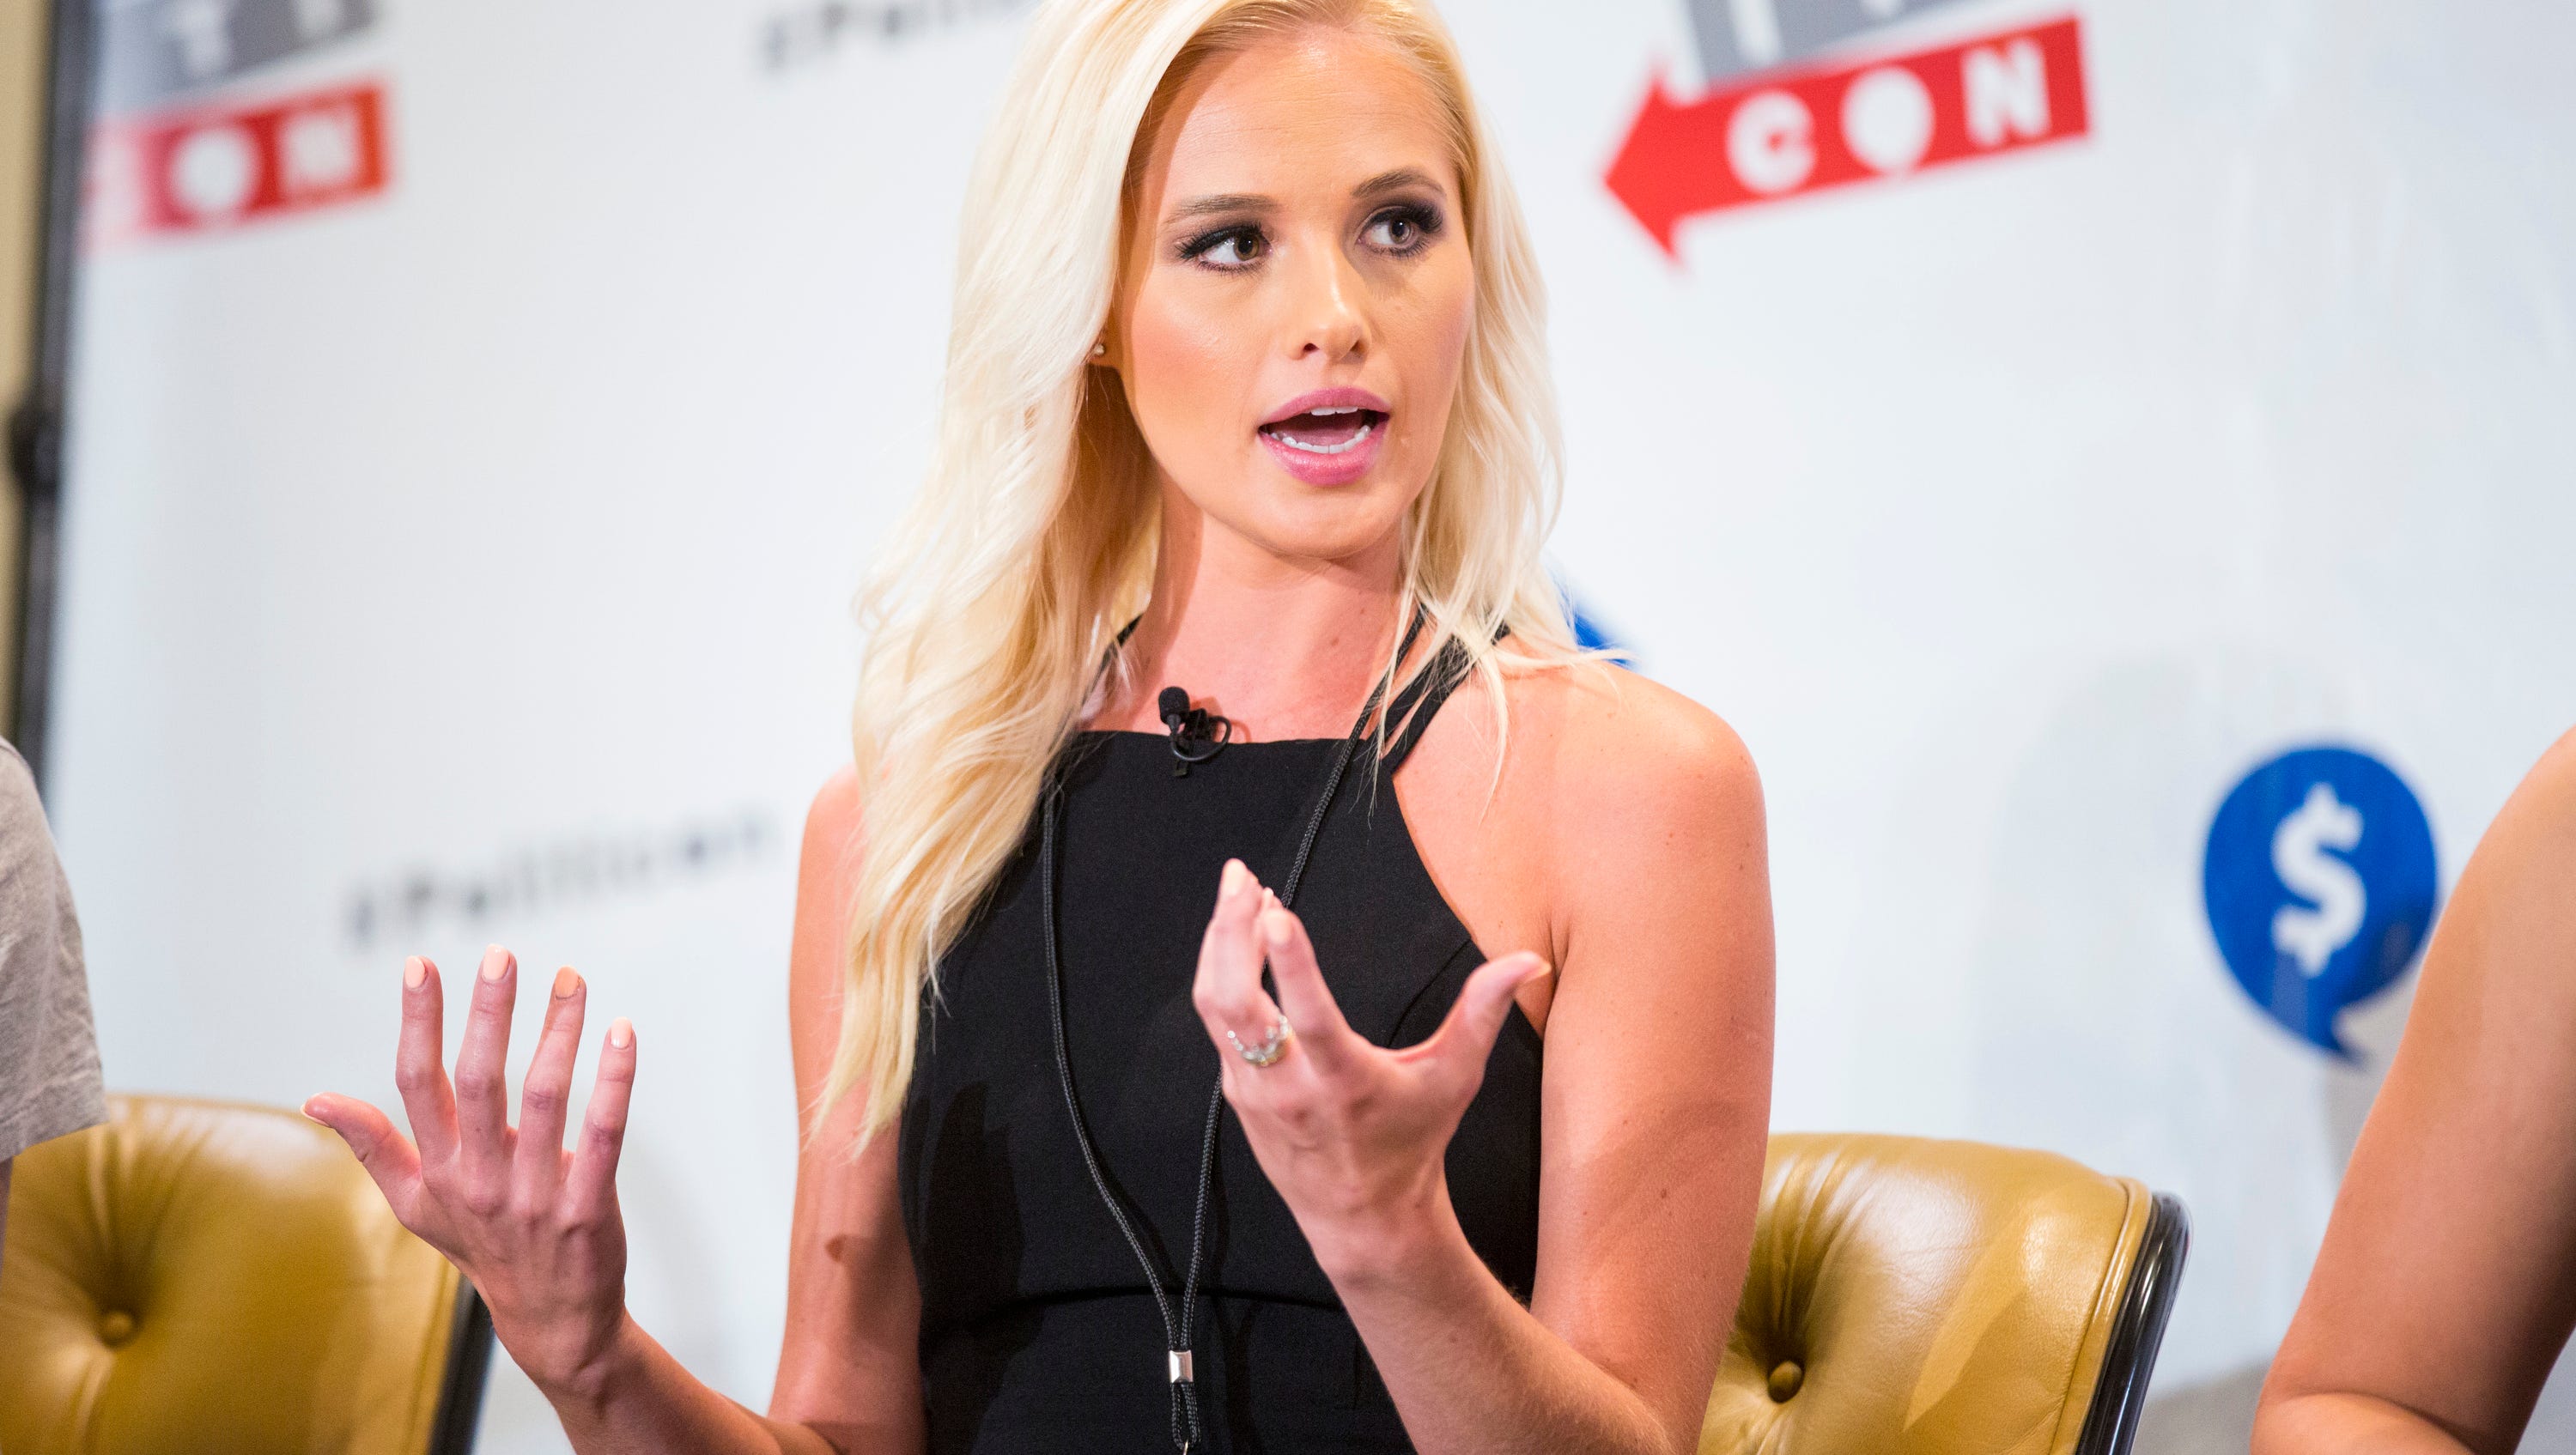 Commentator Tomi Lahren Suspended From The Blaze